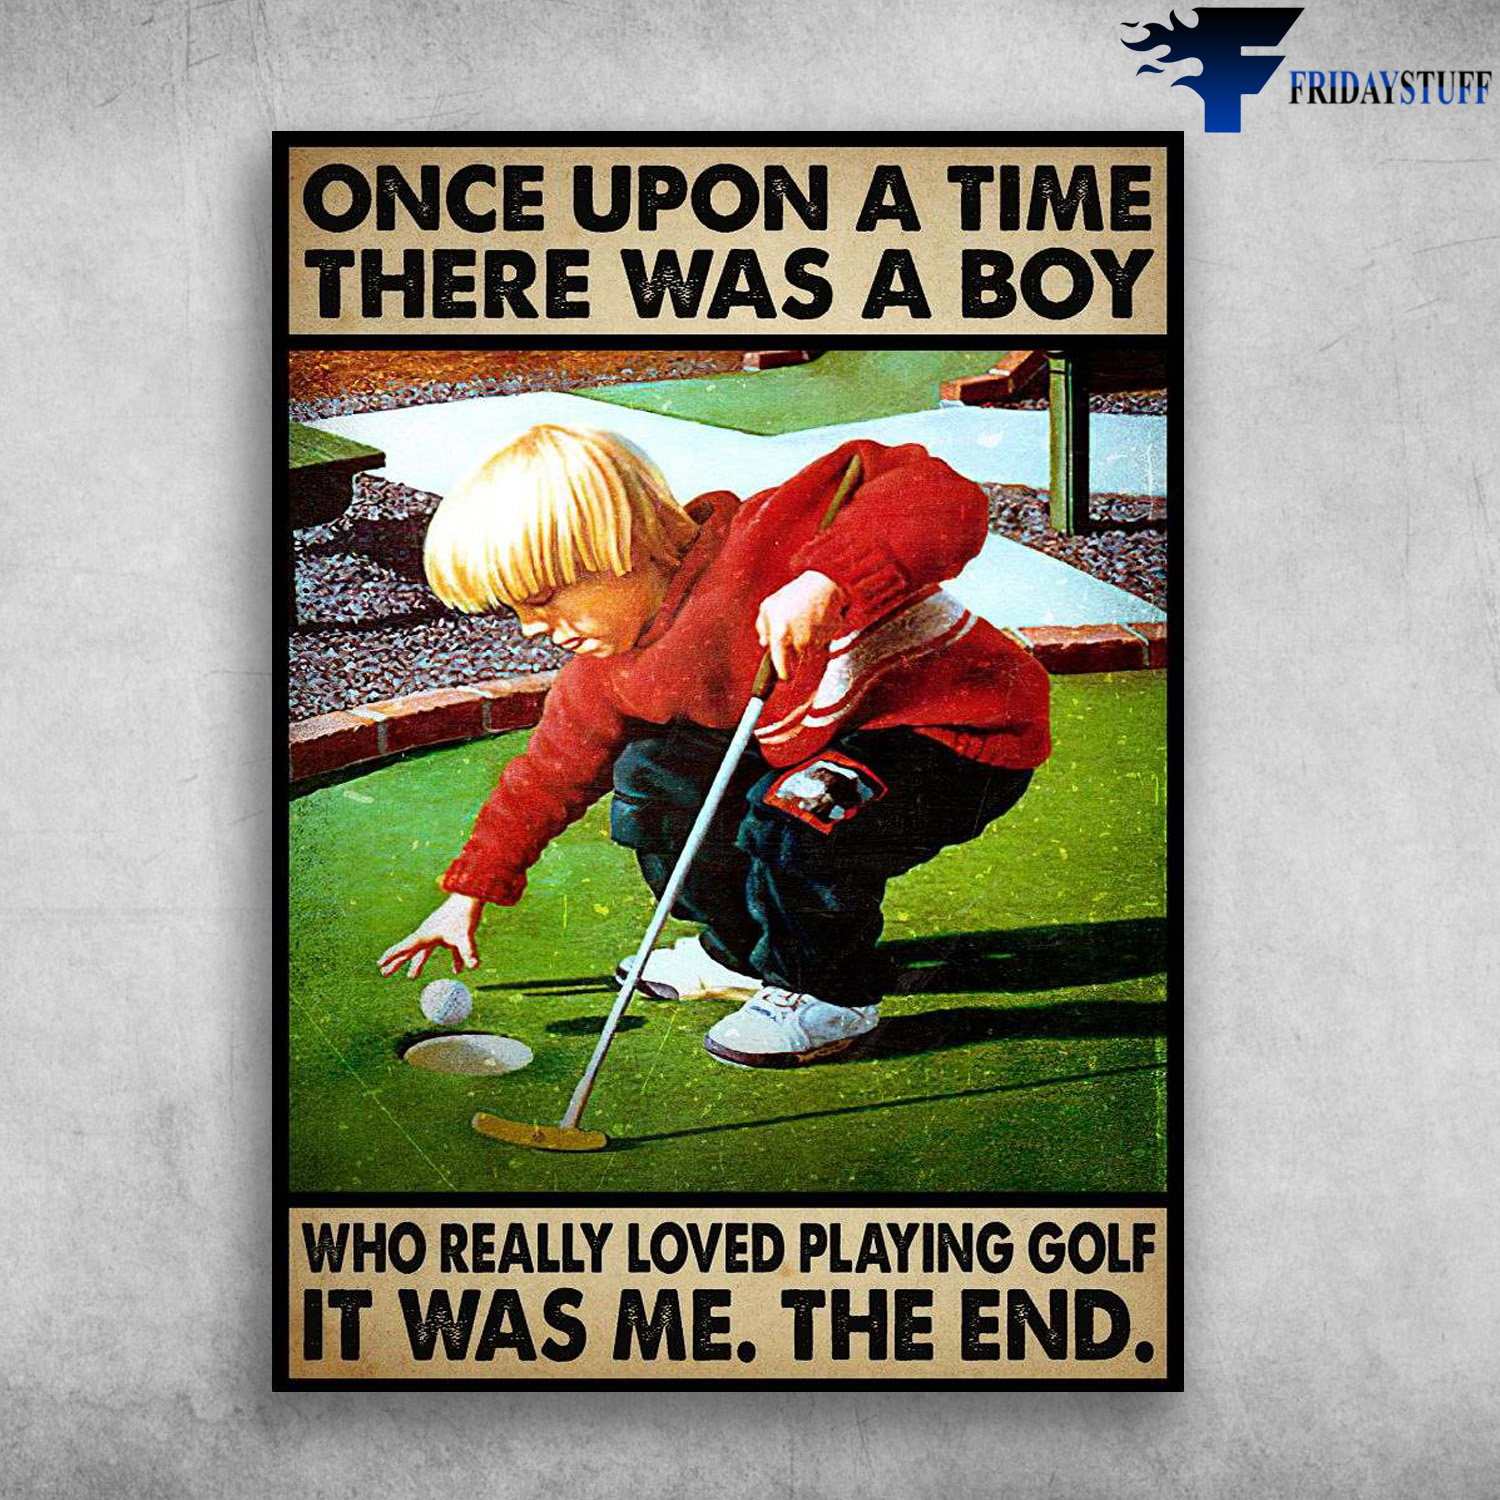 Little Boy Golf - Once Upon A Time, There Was A Boy, Who Really Loved Playing Golf, It Was Me, The End